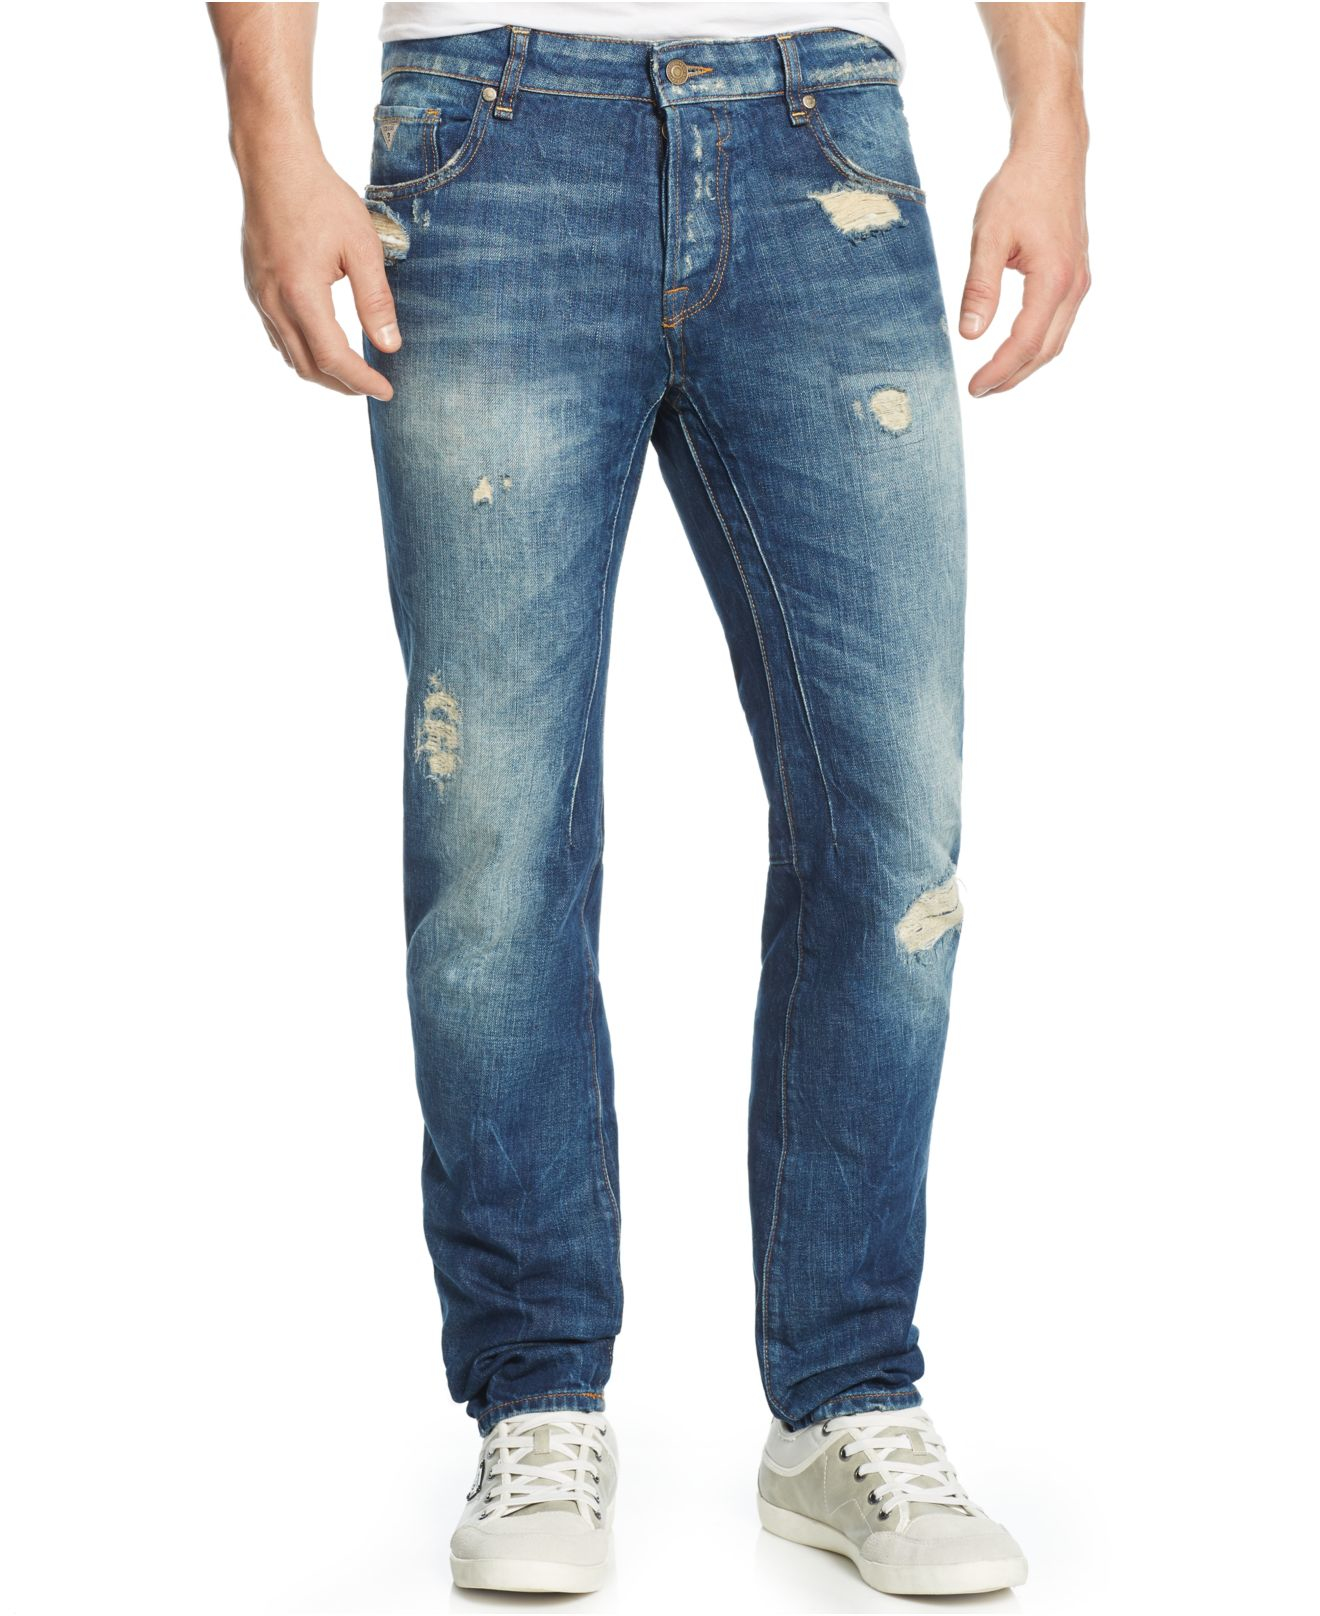 Lyst - Guess Dylan Helmet-wash Tapered Jeans in Blue for Men